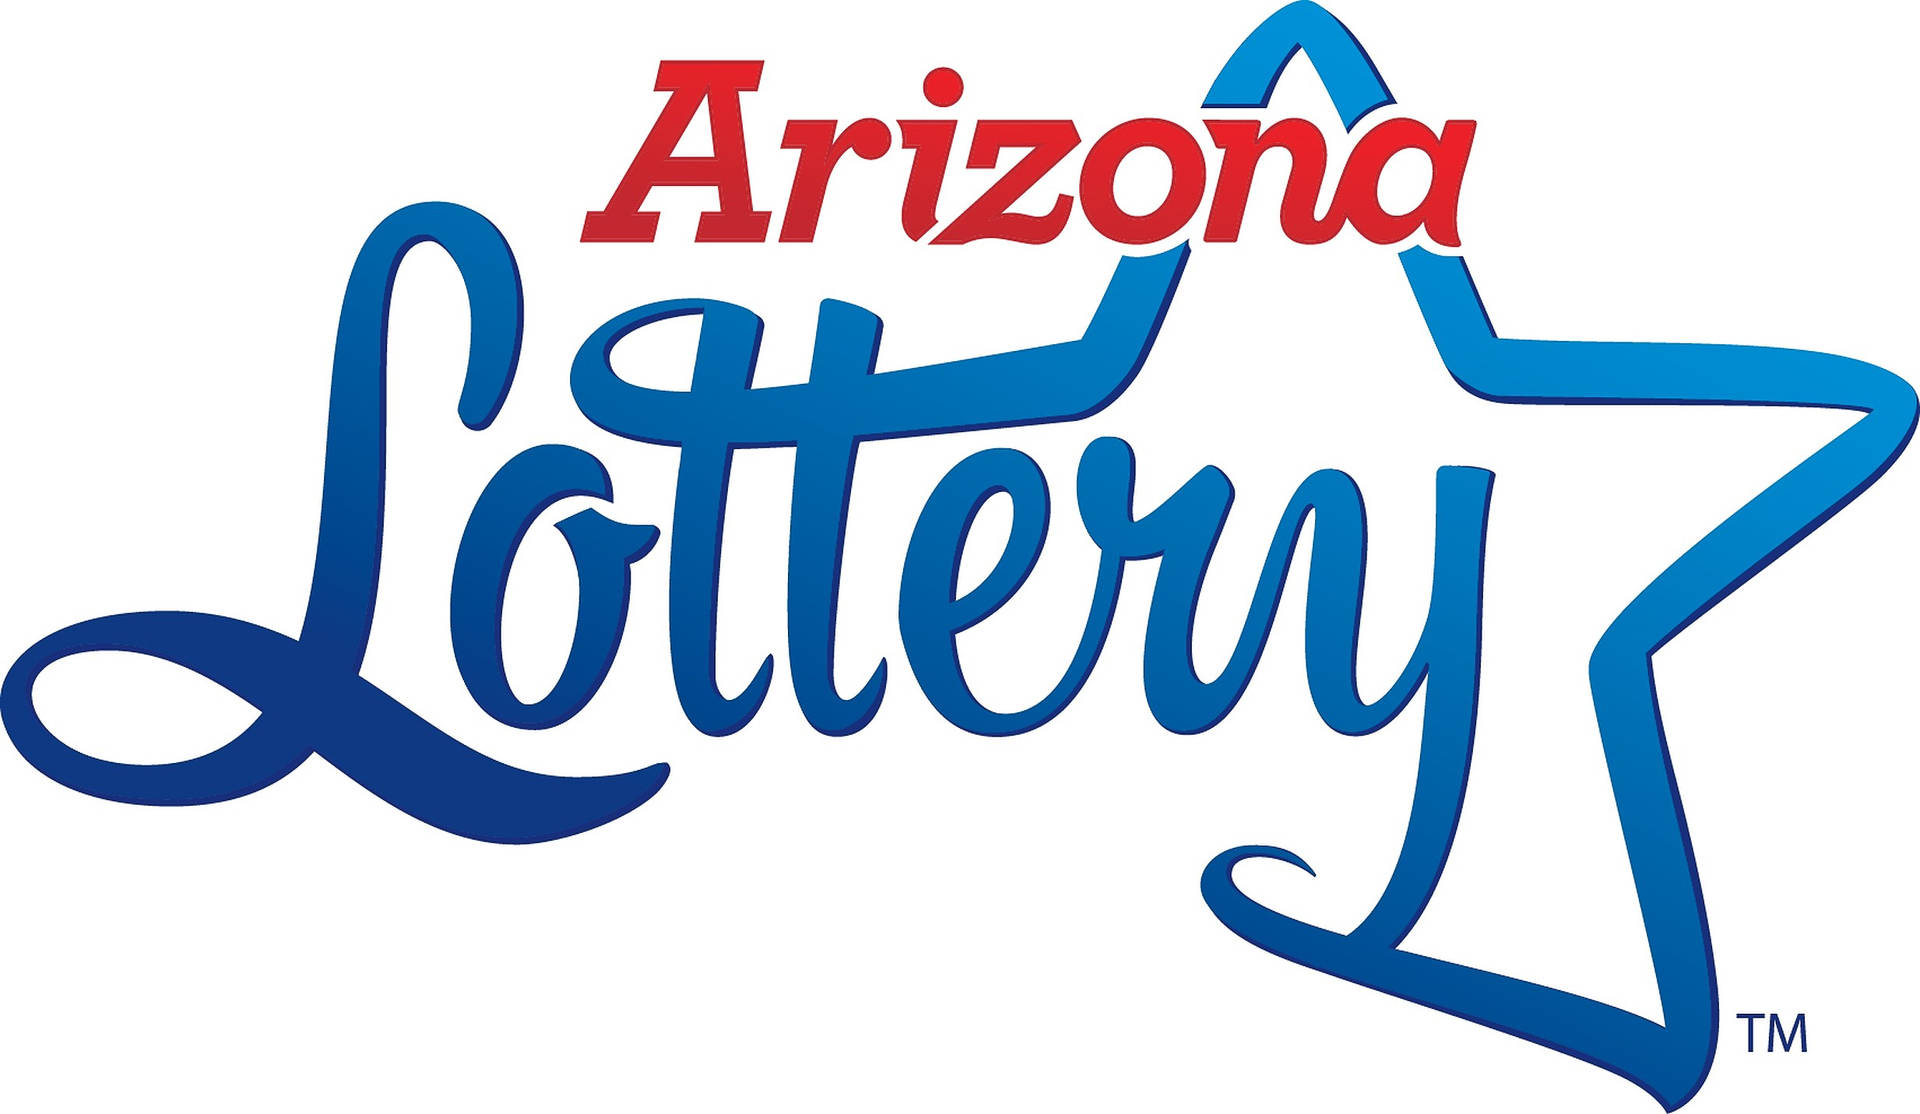 Exciting Arizona Lottery Banner Background